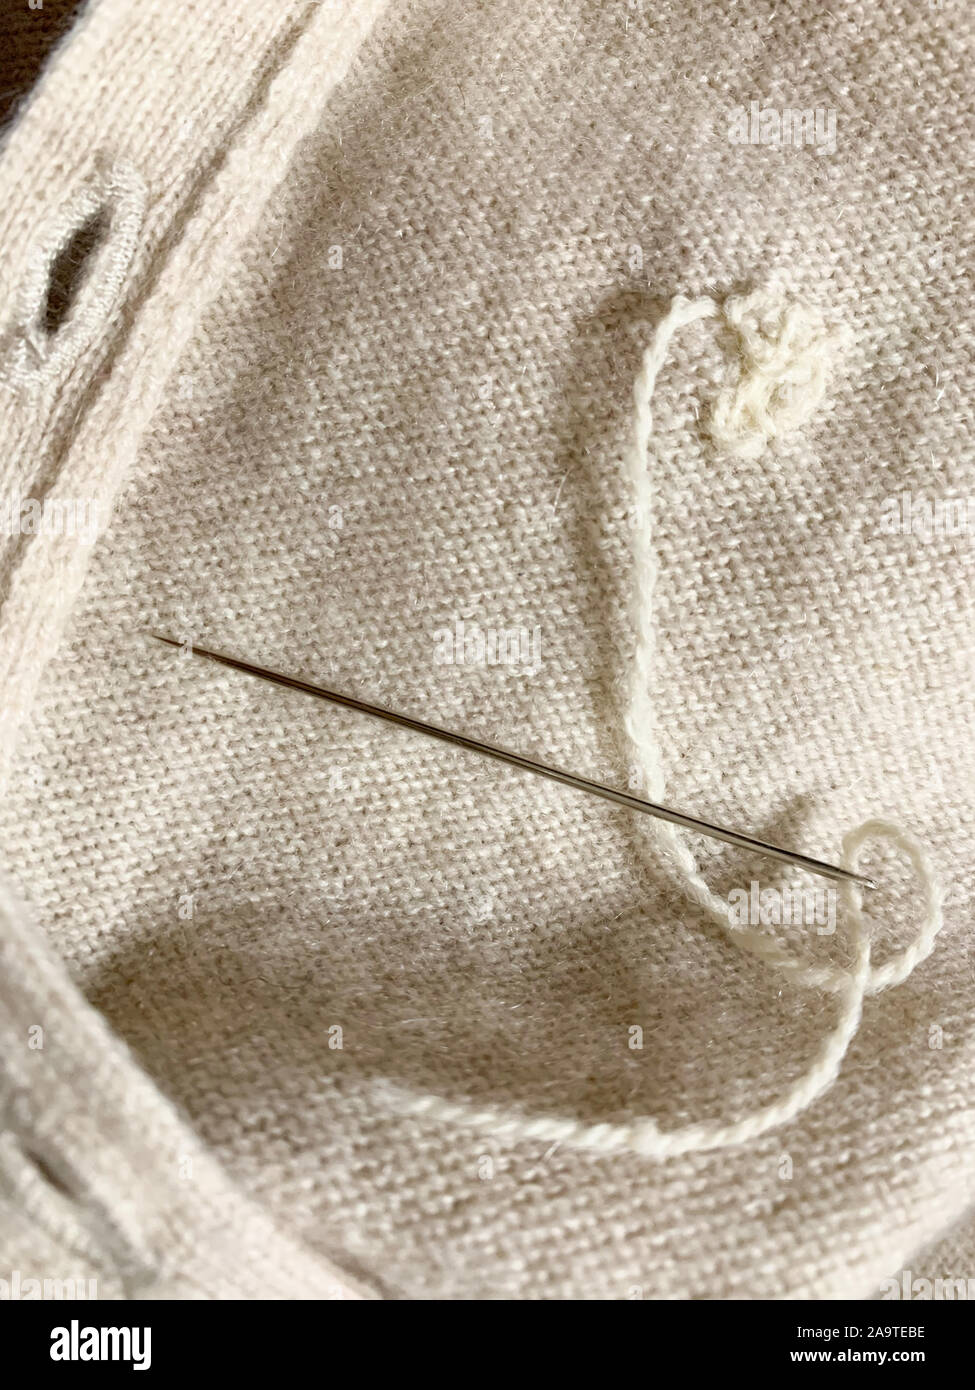 Expensive cashmere sweater with holes caused by cloth moths (Tineola bisselliella) is being repaired with a needle. Selective focus Stock Photo